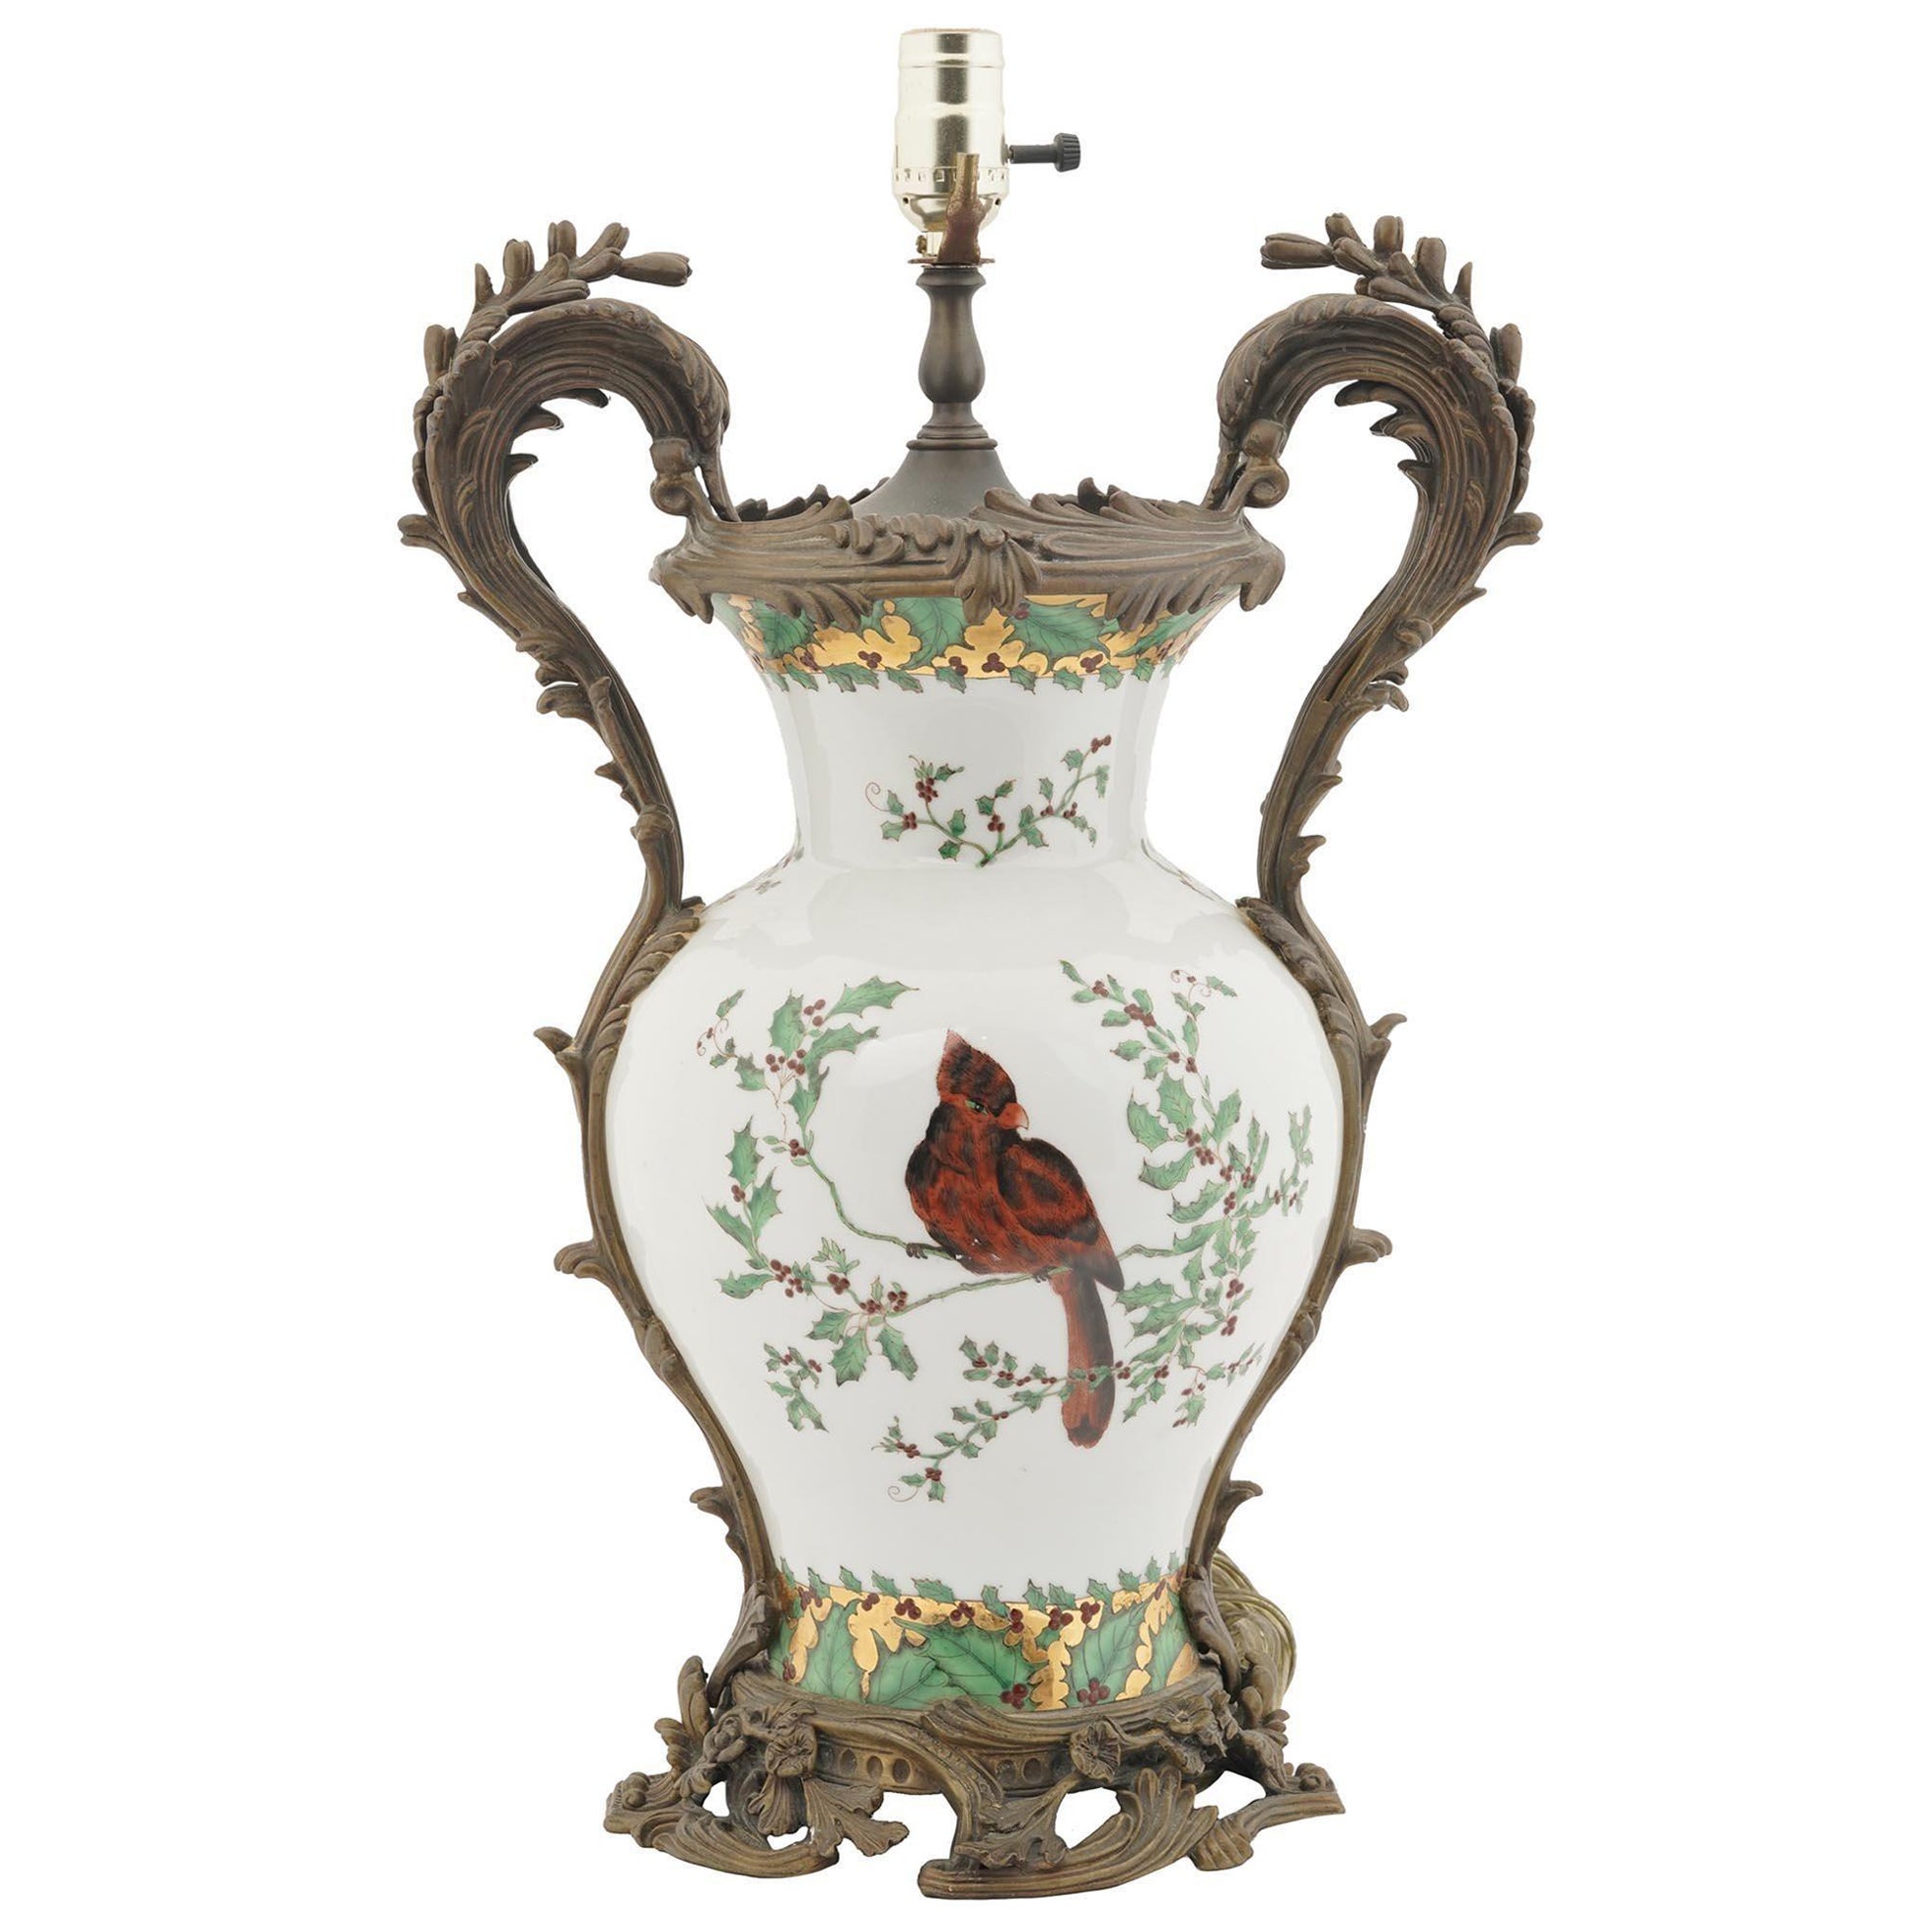 Bronze Mounted Porcelain Table Lamp in Louis XV Style with Cardinal Bird